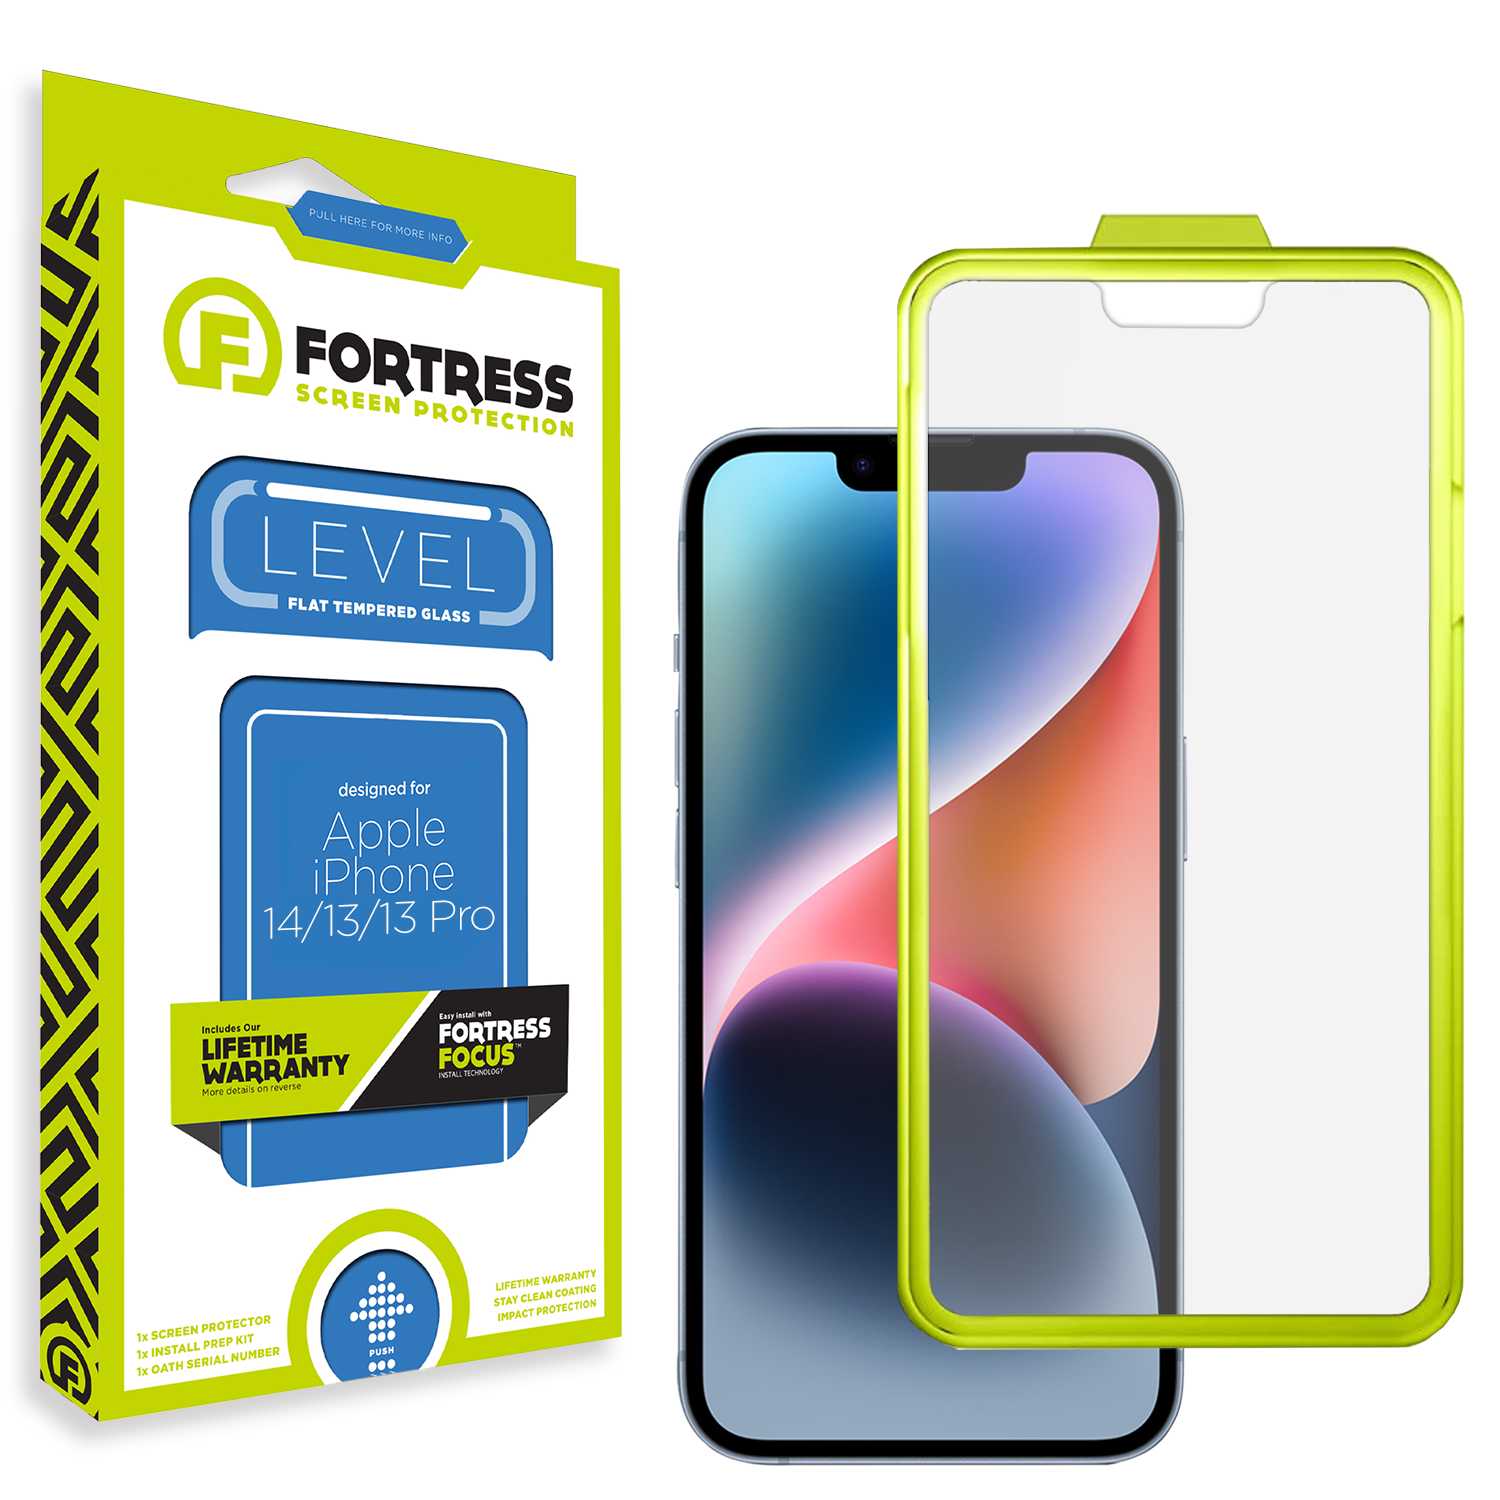 Fortress iPhone 13 Screen Protector $0CoverageInstallTool Scooch Screen Protector